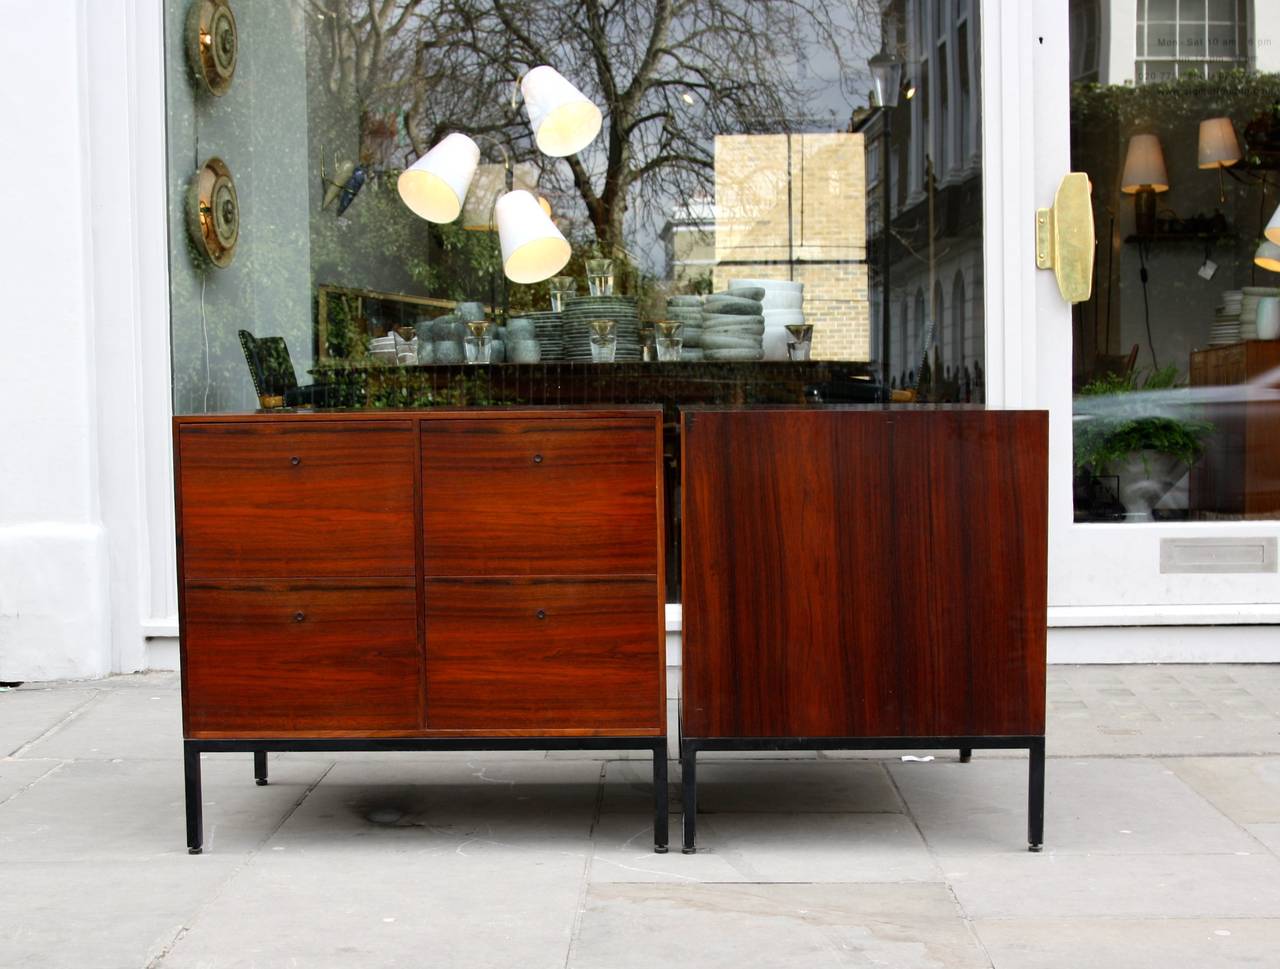 Pair of chests of drawers by Mogens Koch, originally designed and made for a jewelry shop in Aarhus, Denmark. 
Rosewood and oak on a black painted metal base, all in great quality.